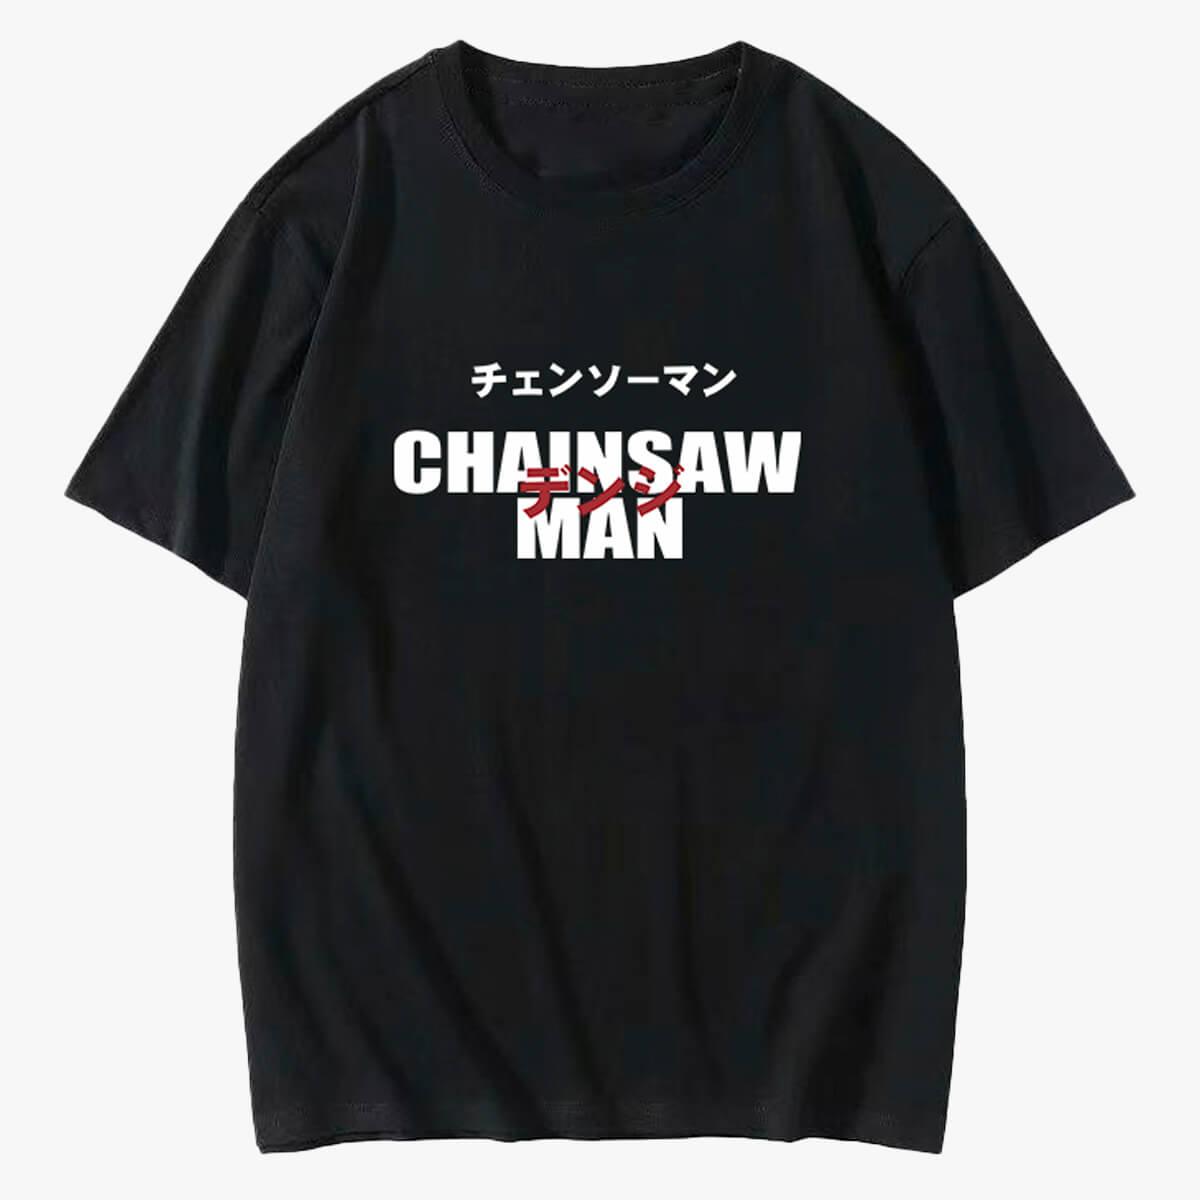 Chainsaw Man Logo Anime Aesthetic T-Shirt - Aesthetic Clothes Shop